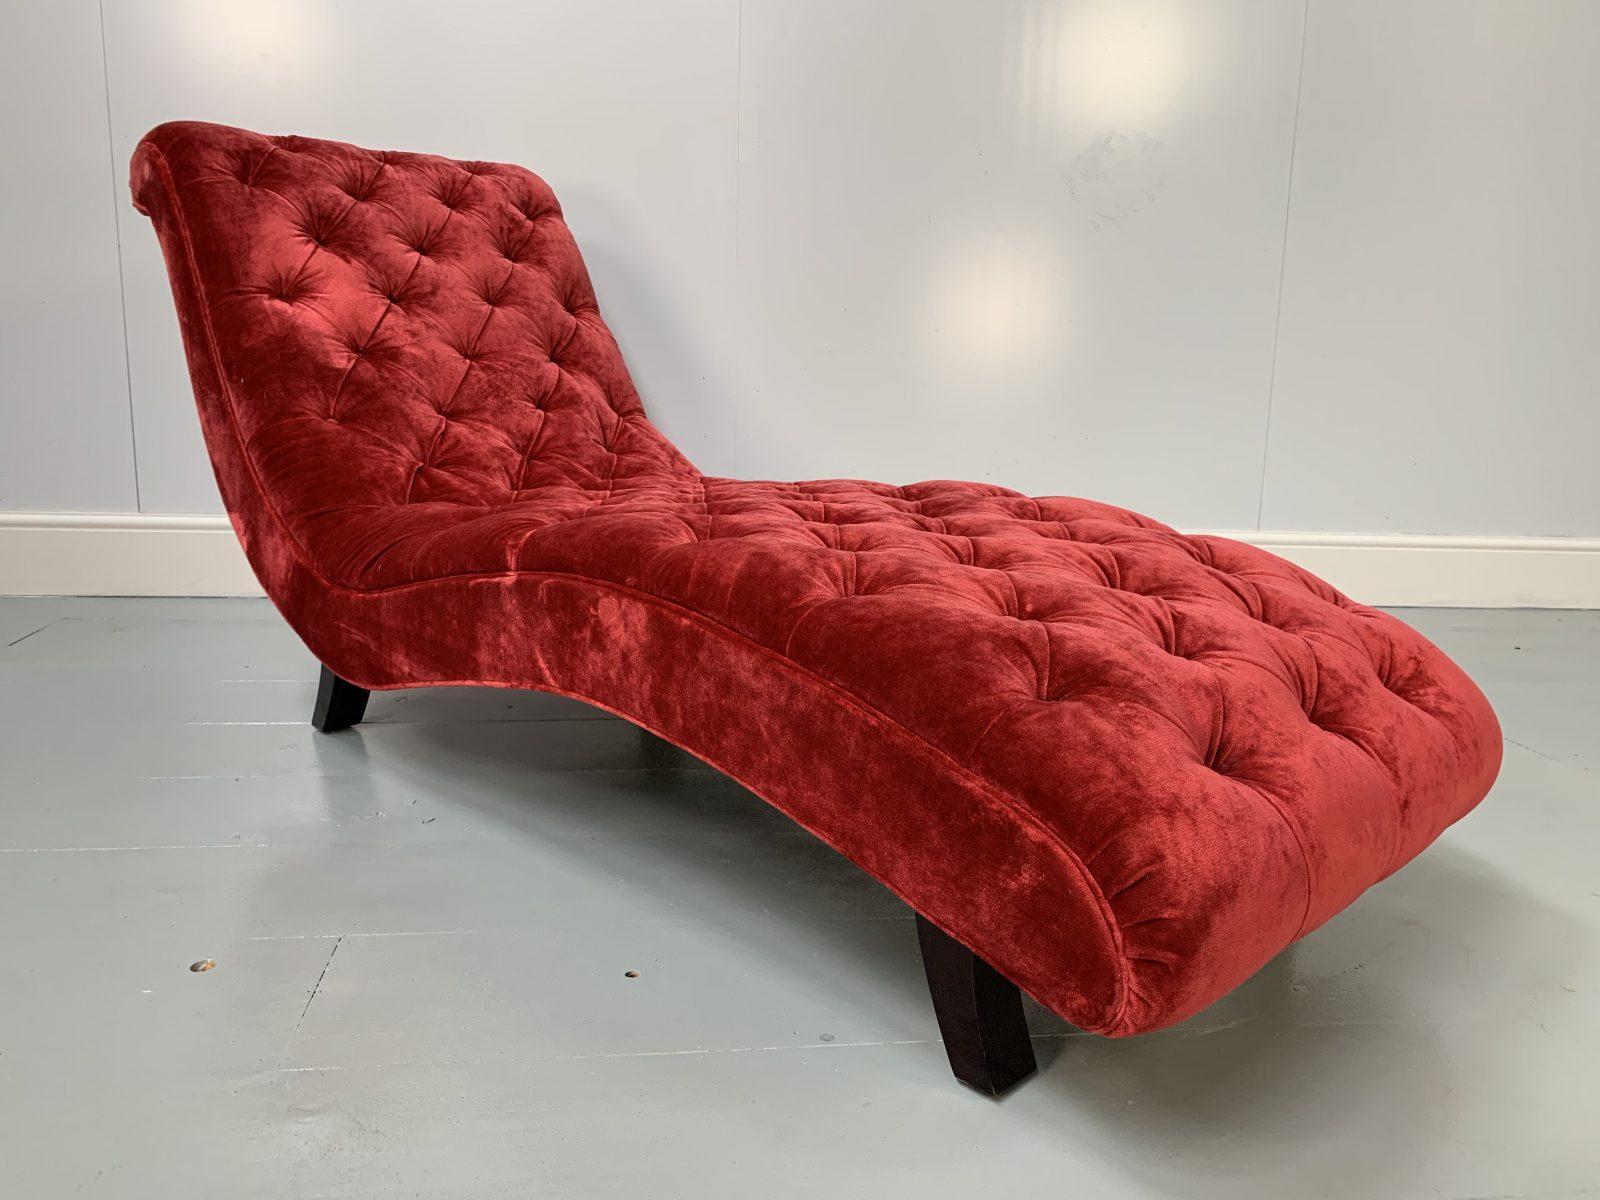 Hello Friends.
On offer on this occasion is a rare, superb George Smith Signature “Brewster” Chaise, dressed in a peerless, elegant, top-grade and sensationally-tactile Italian Velvet fabric in Deep-Red, and with Hardwood Legs.

As you will no